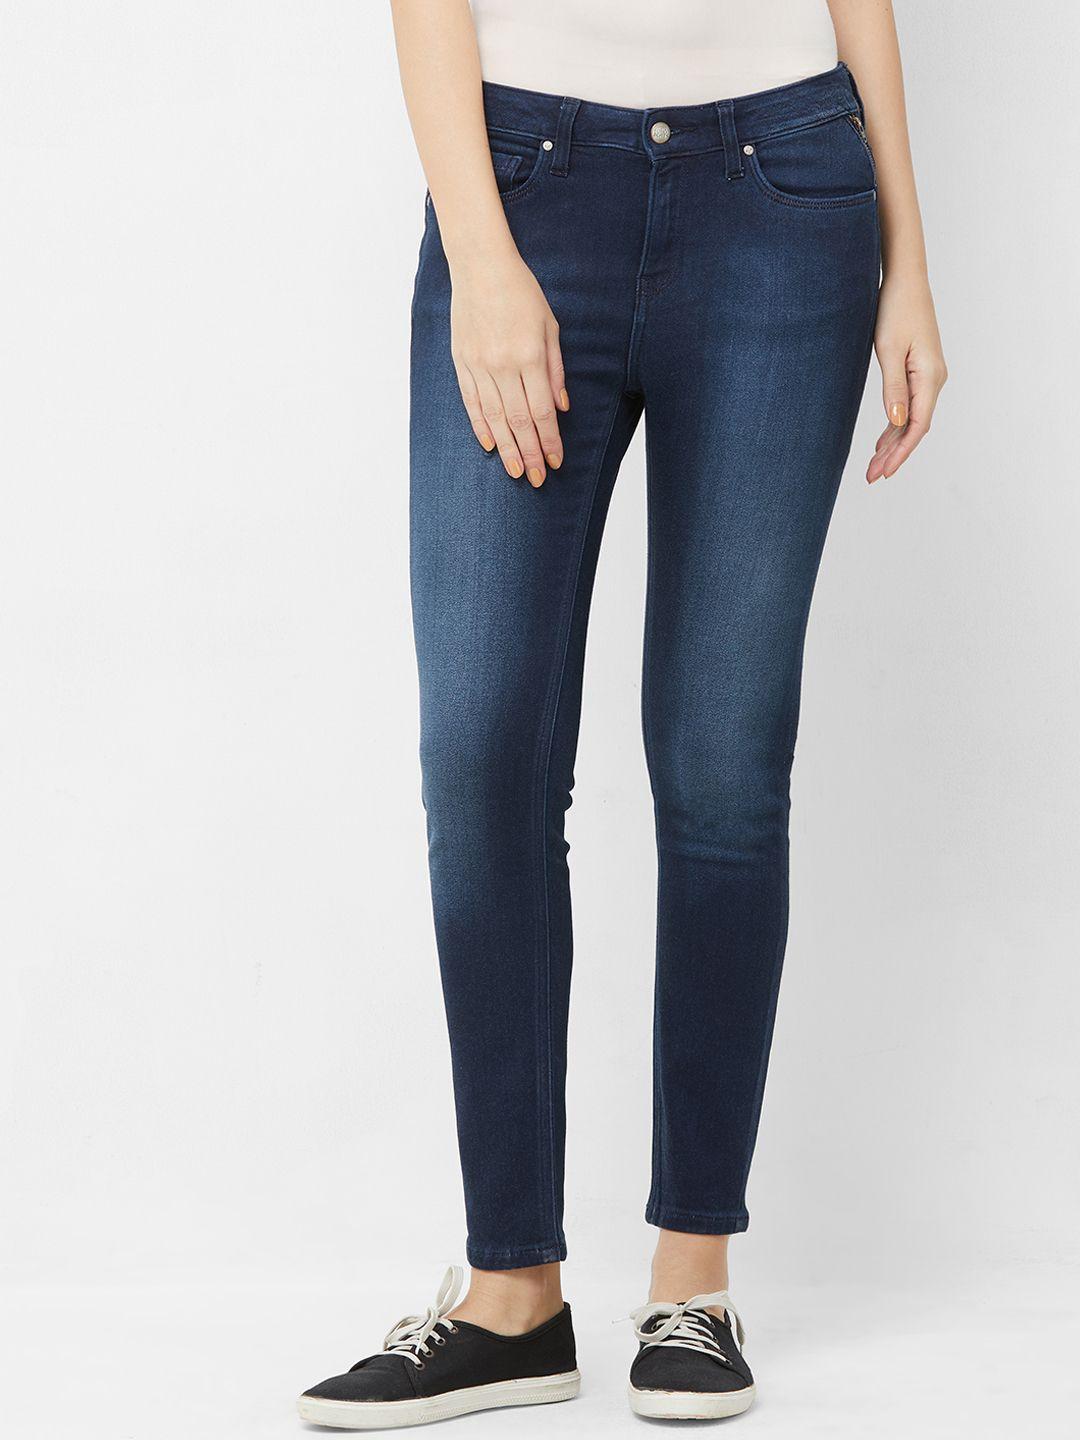 Fusion Beats Women Blue Regular Fit Mid-Rise Clean Look Jeans